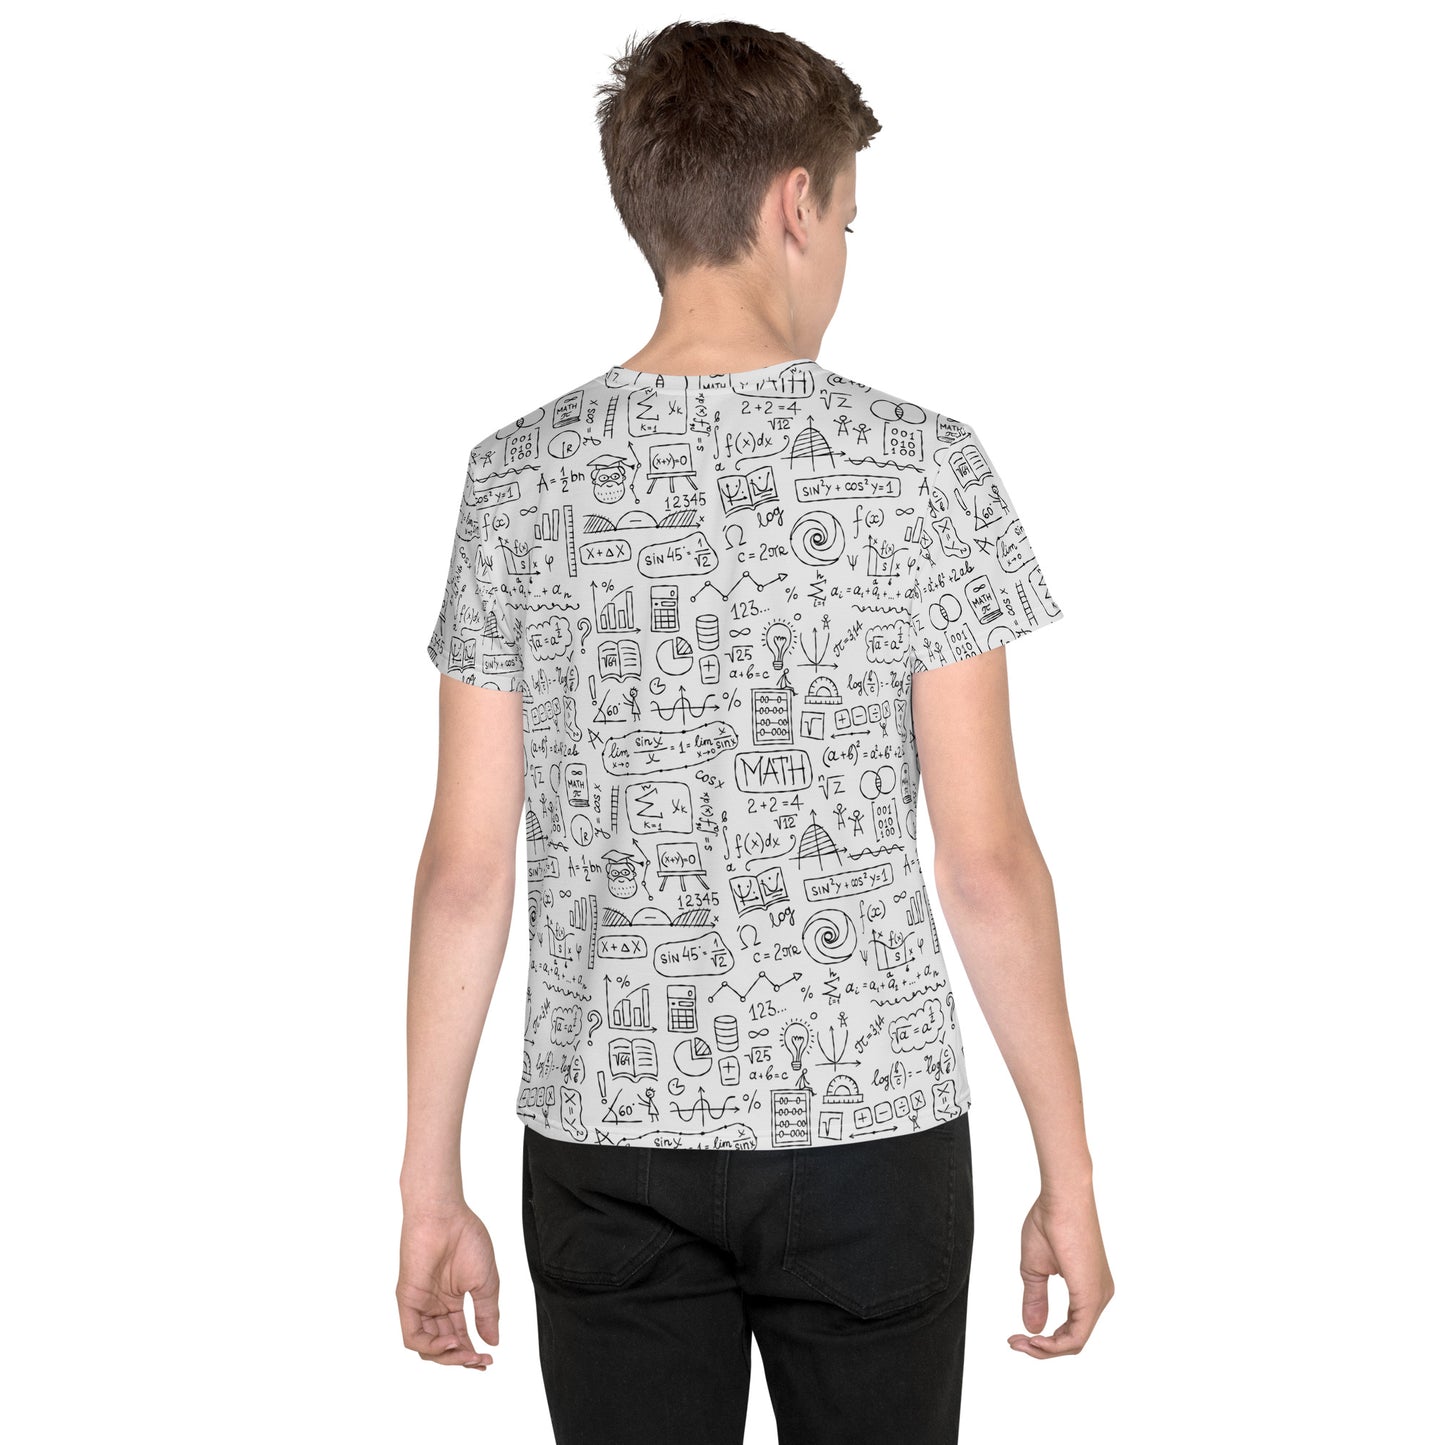 Boy wearing t-shirt light grey color with all-over math print featuring algebra and calculus symbols and equations. Back view